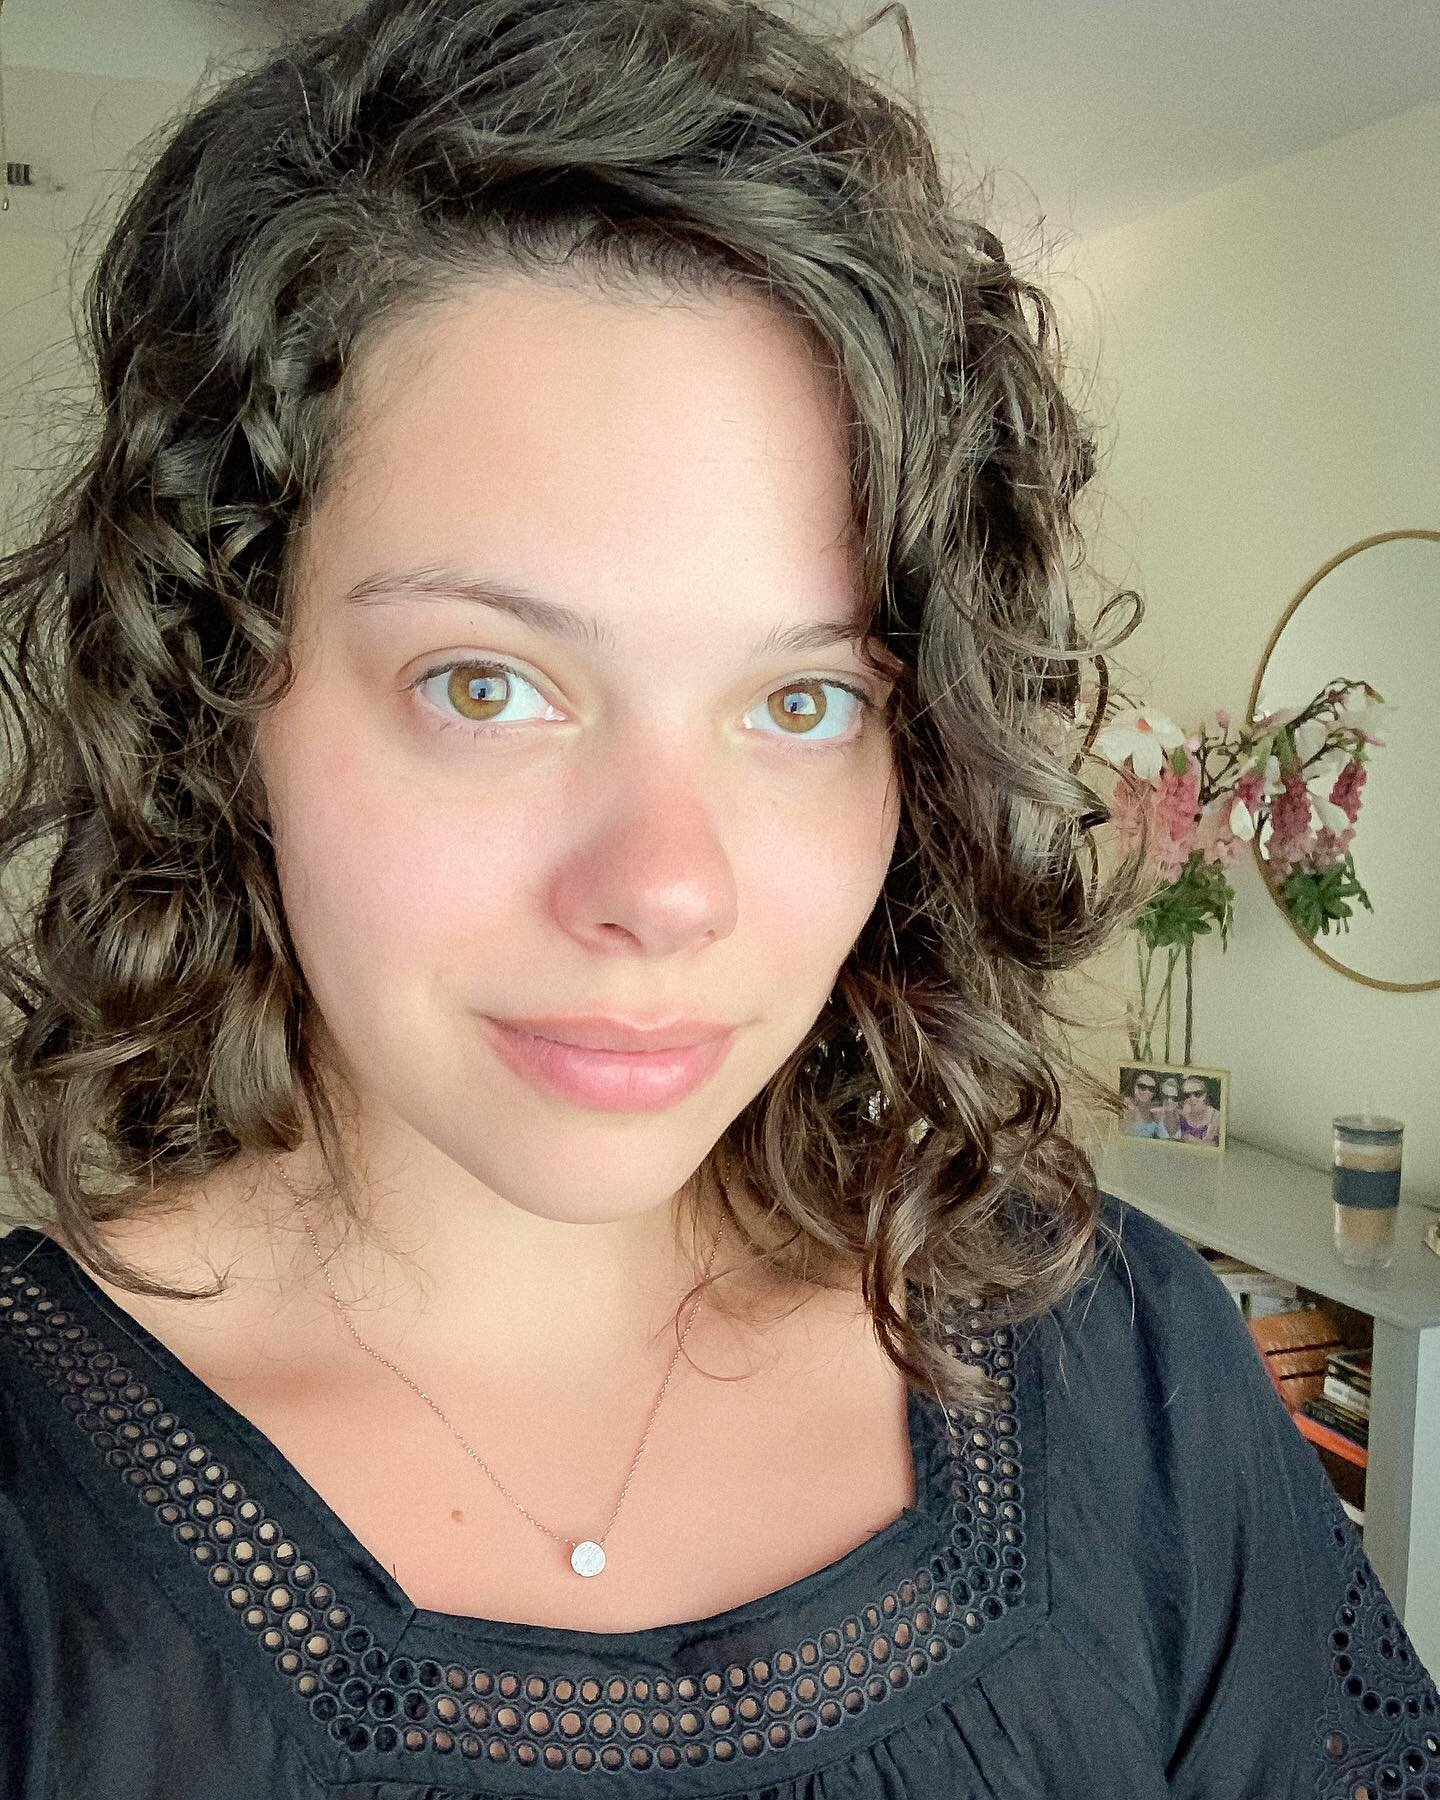 QUESTION: Have you experienced any significant hair or skin changes since March? 
Once I got my painful #maskne under control (we love skincare results that don&rsquo;t require a second mortgage), my natural skin and {renewing} curly hair have been l